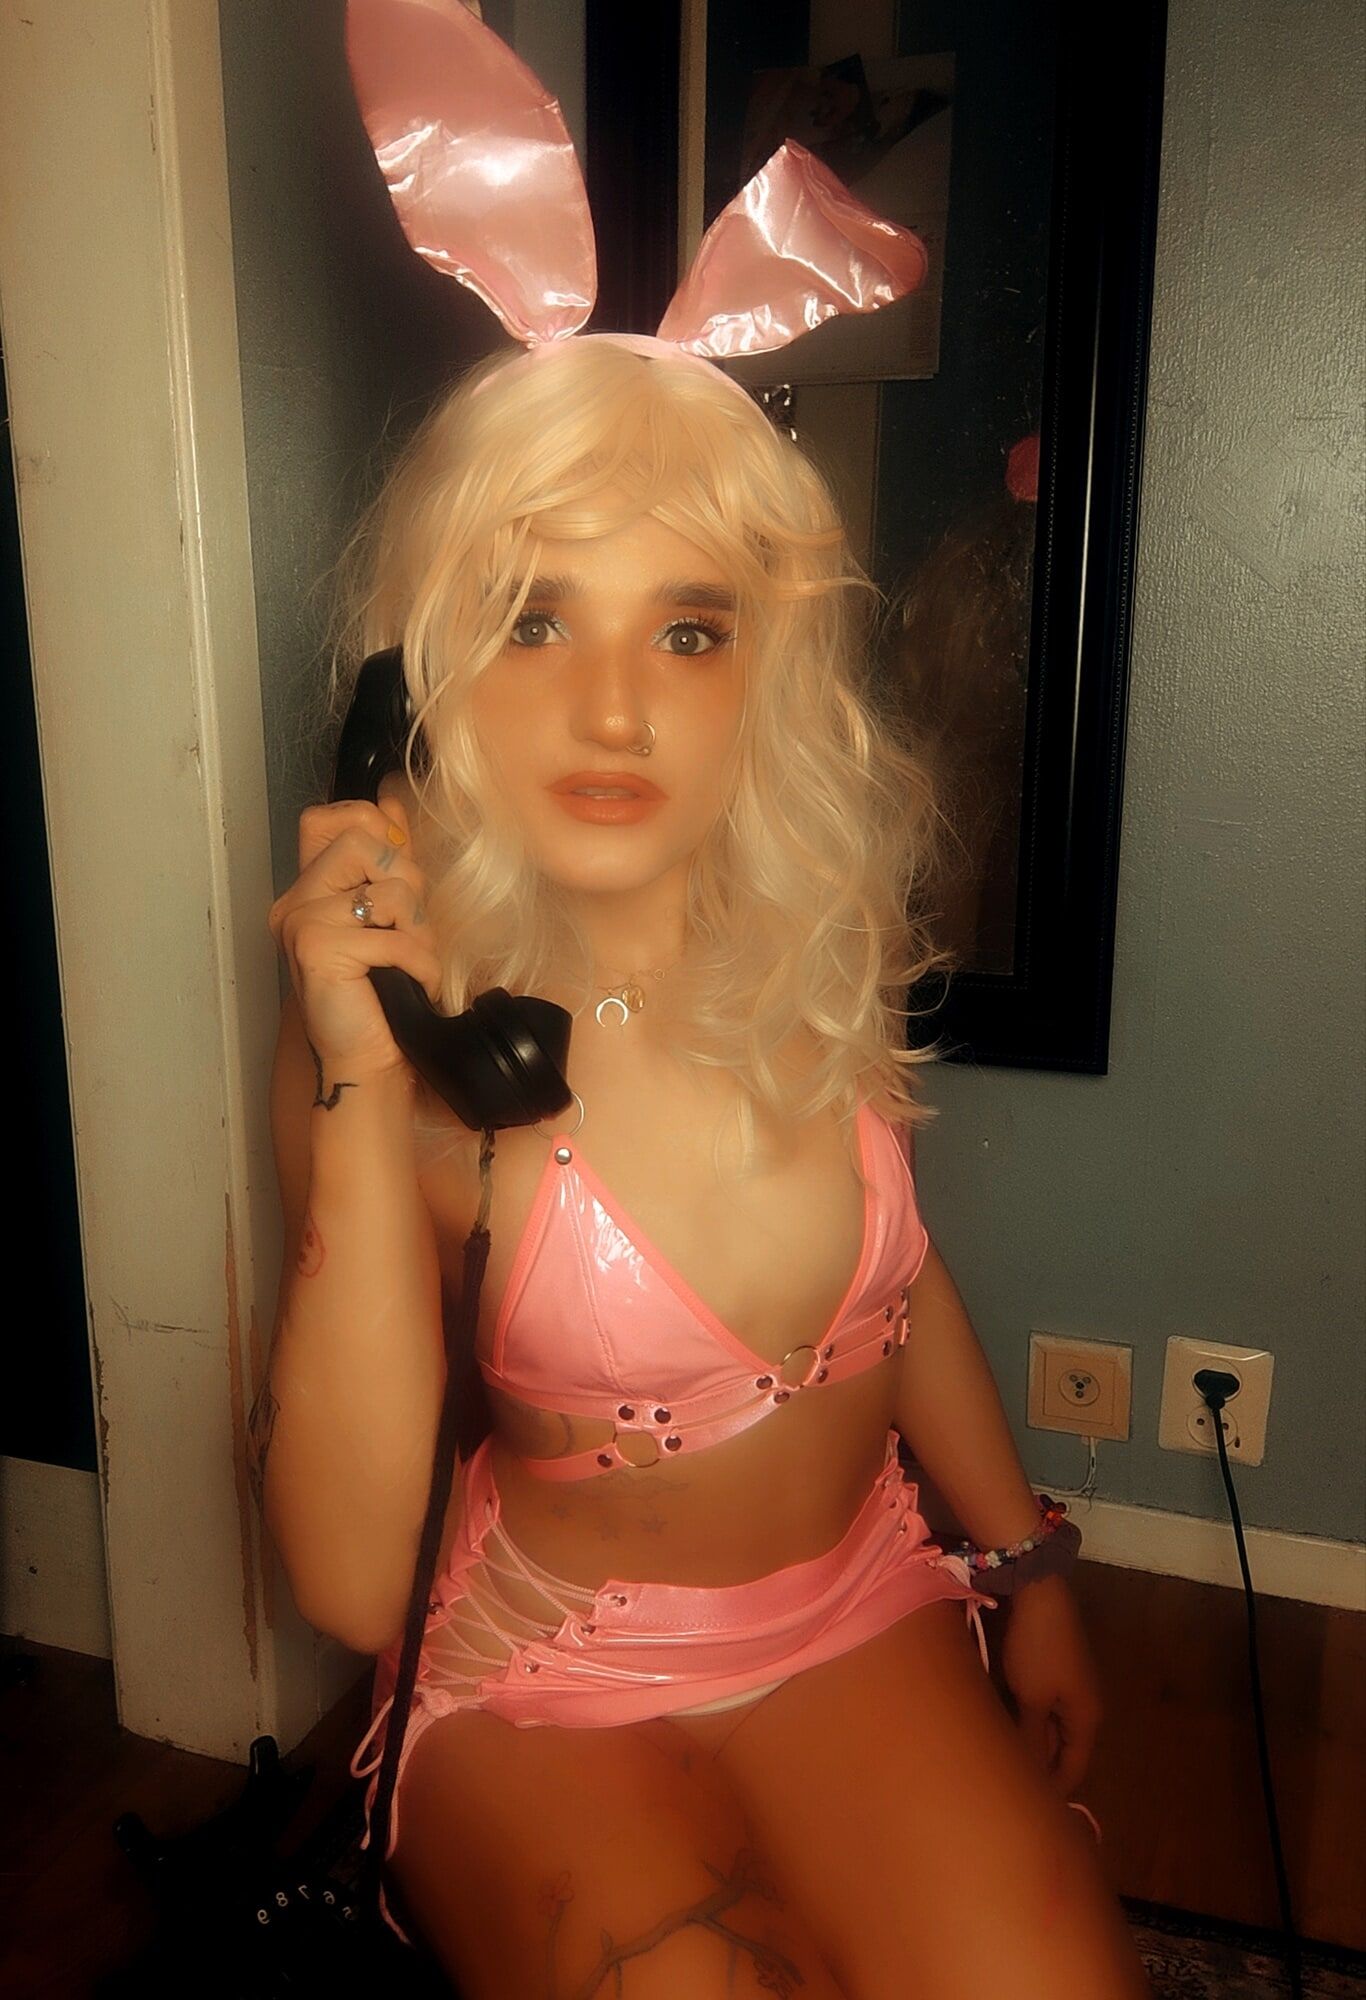 Pink bunny talking on the phone while showing off pussy #57